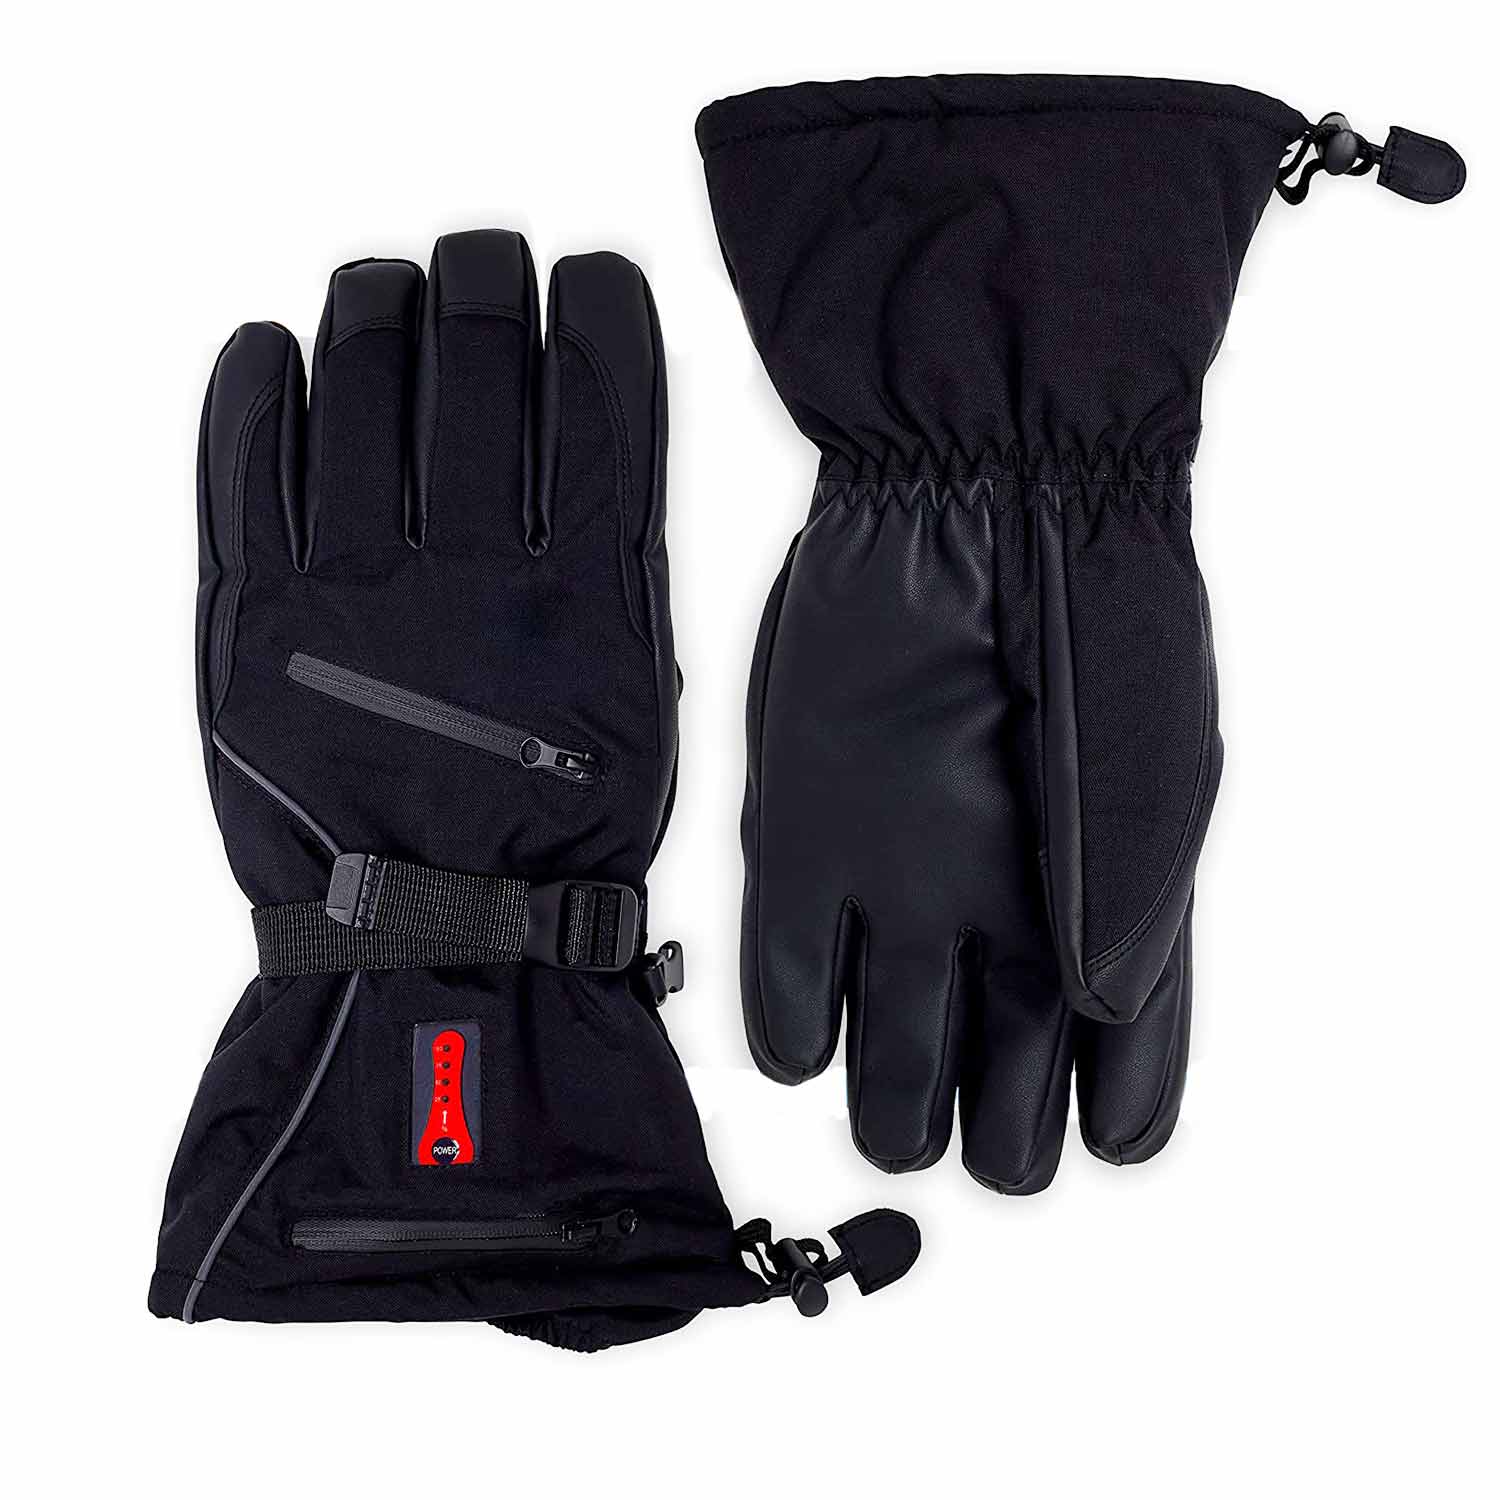 Smart Lithium Battery heated gloves